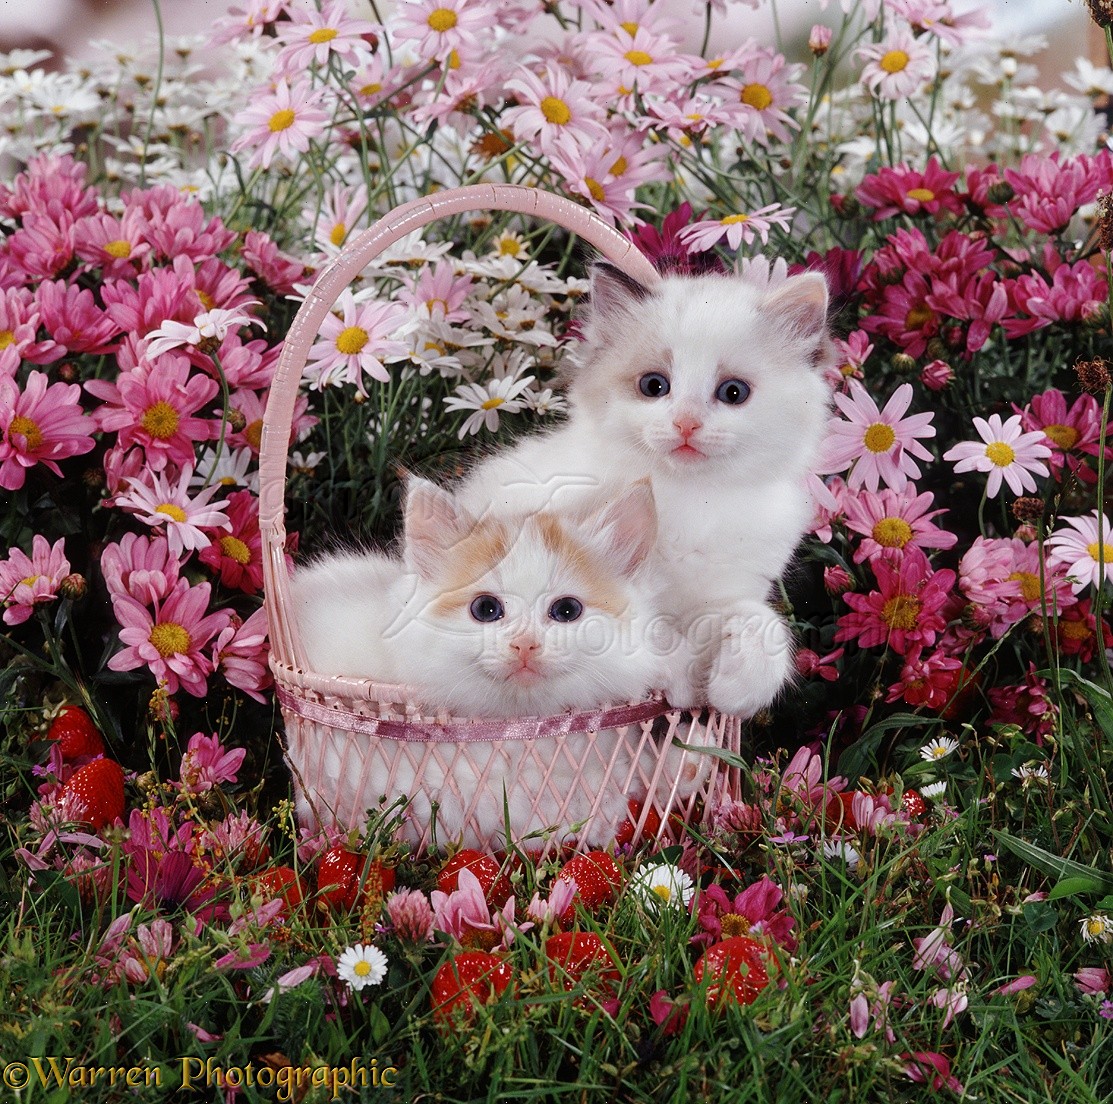 Wp08178 Ragdoll Cross Kittens In A Strawberry Basket After Emptying